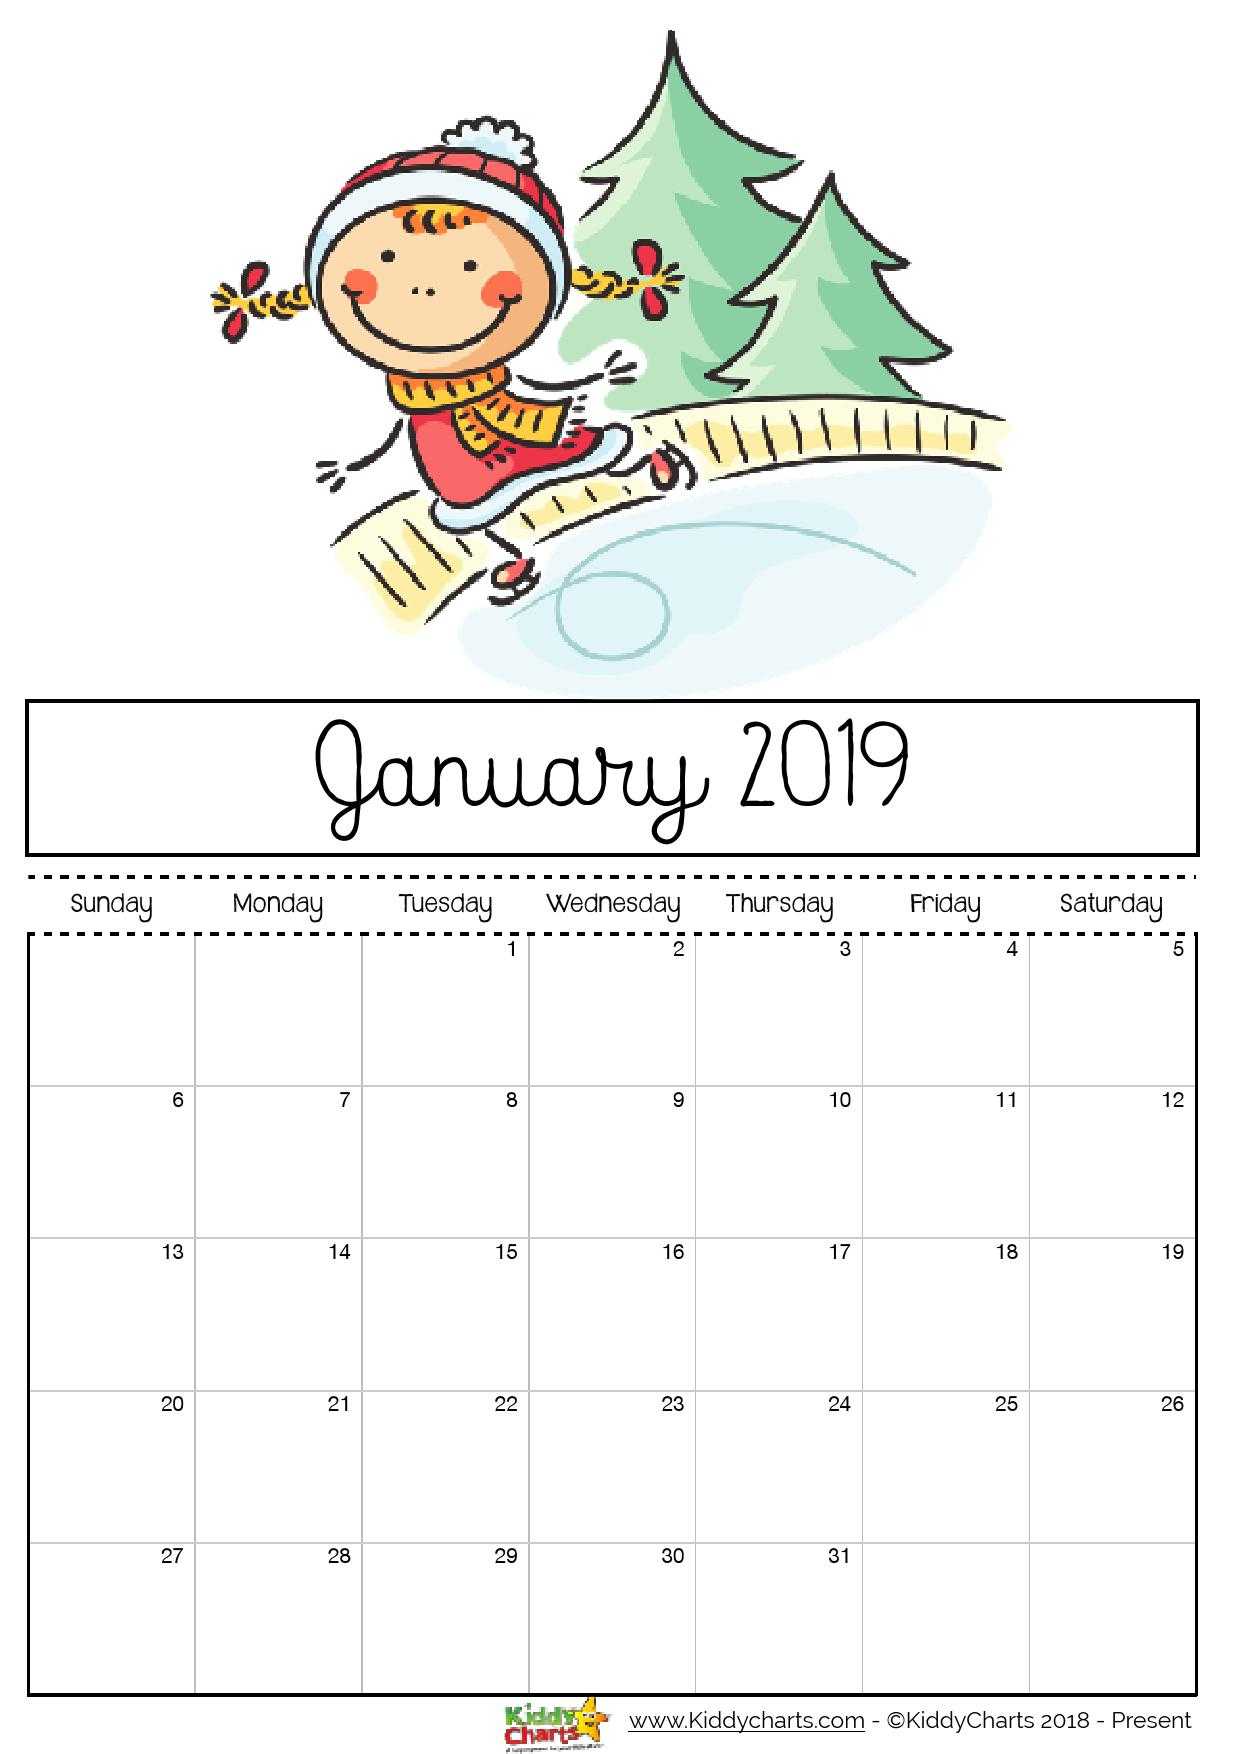 Free Printable 2019 Calendar – Print Yours Here | Kiddycharts With Regard To Blank Calendar Template For Kids